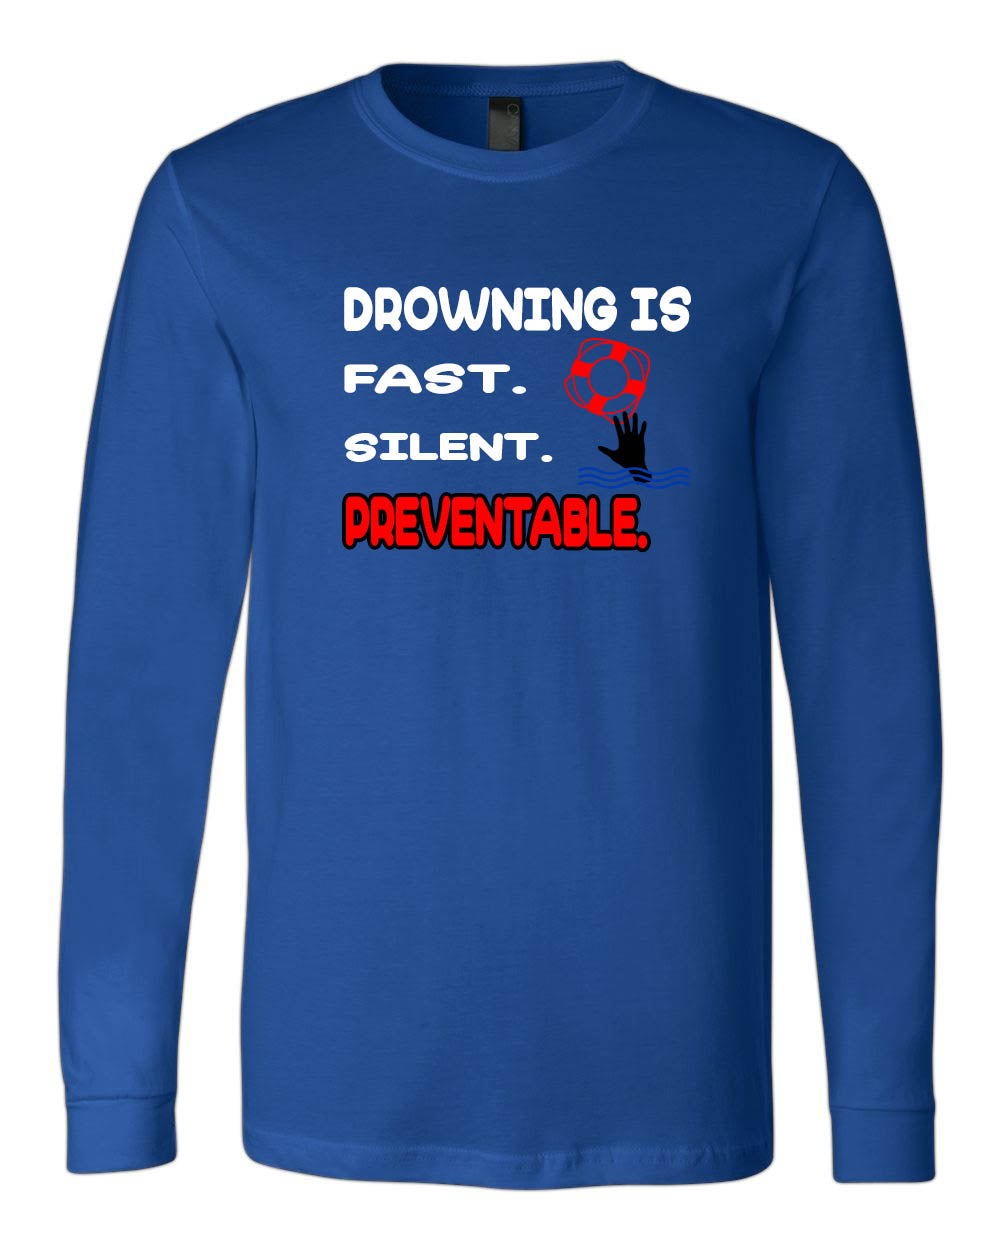 Water Safety Event Long Sleeve Shirt